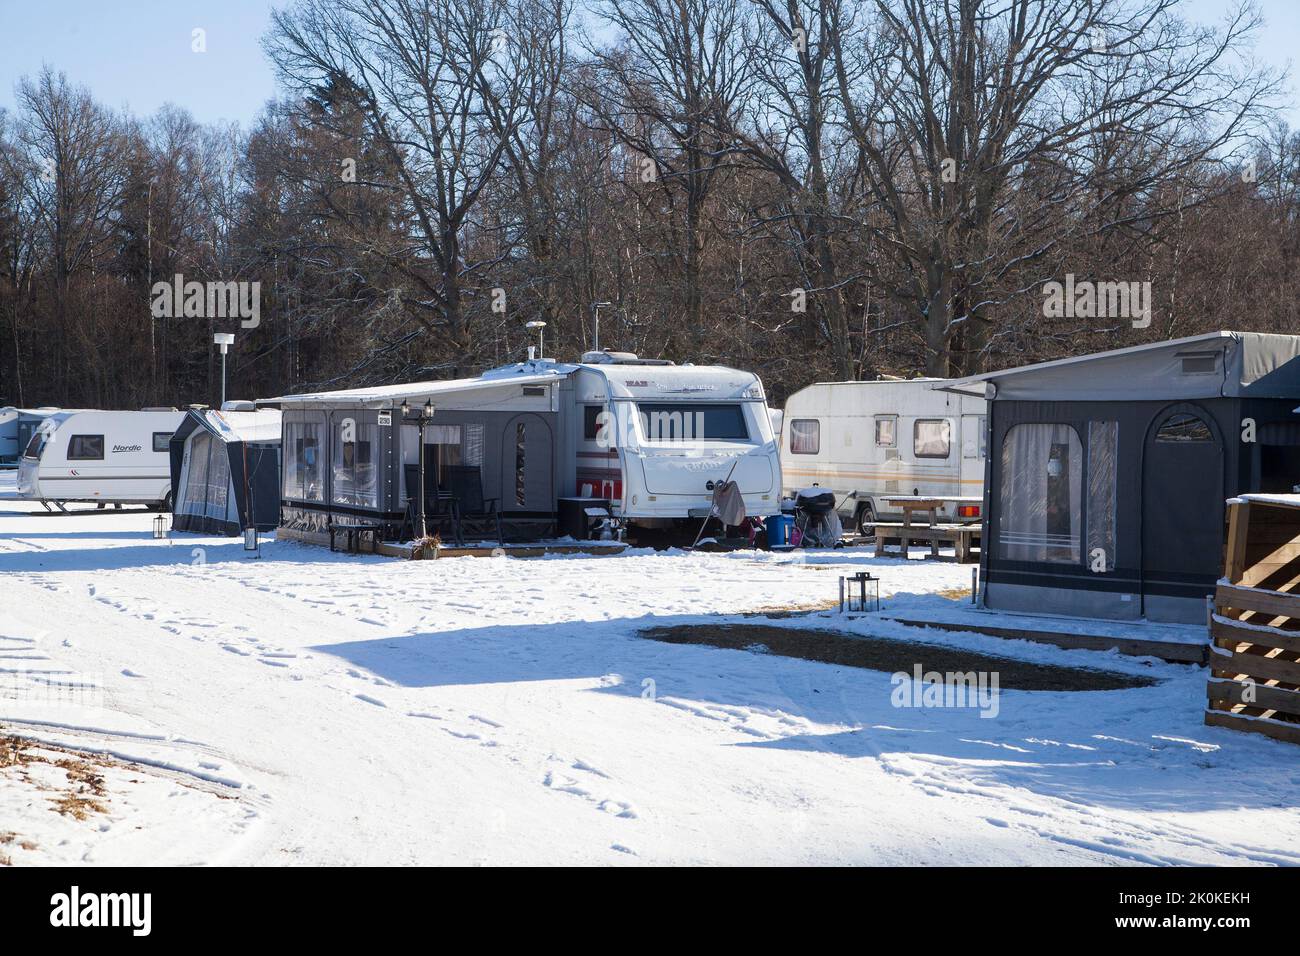 YEAR-ROUND CAMPING in caravan on a snowy winter´s day Stock Photo